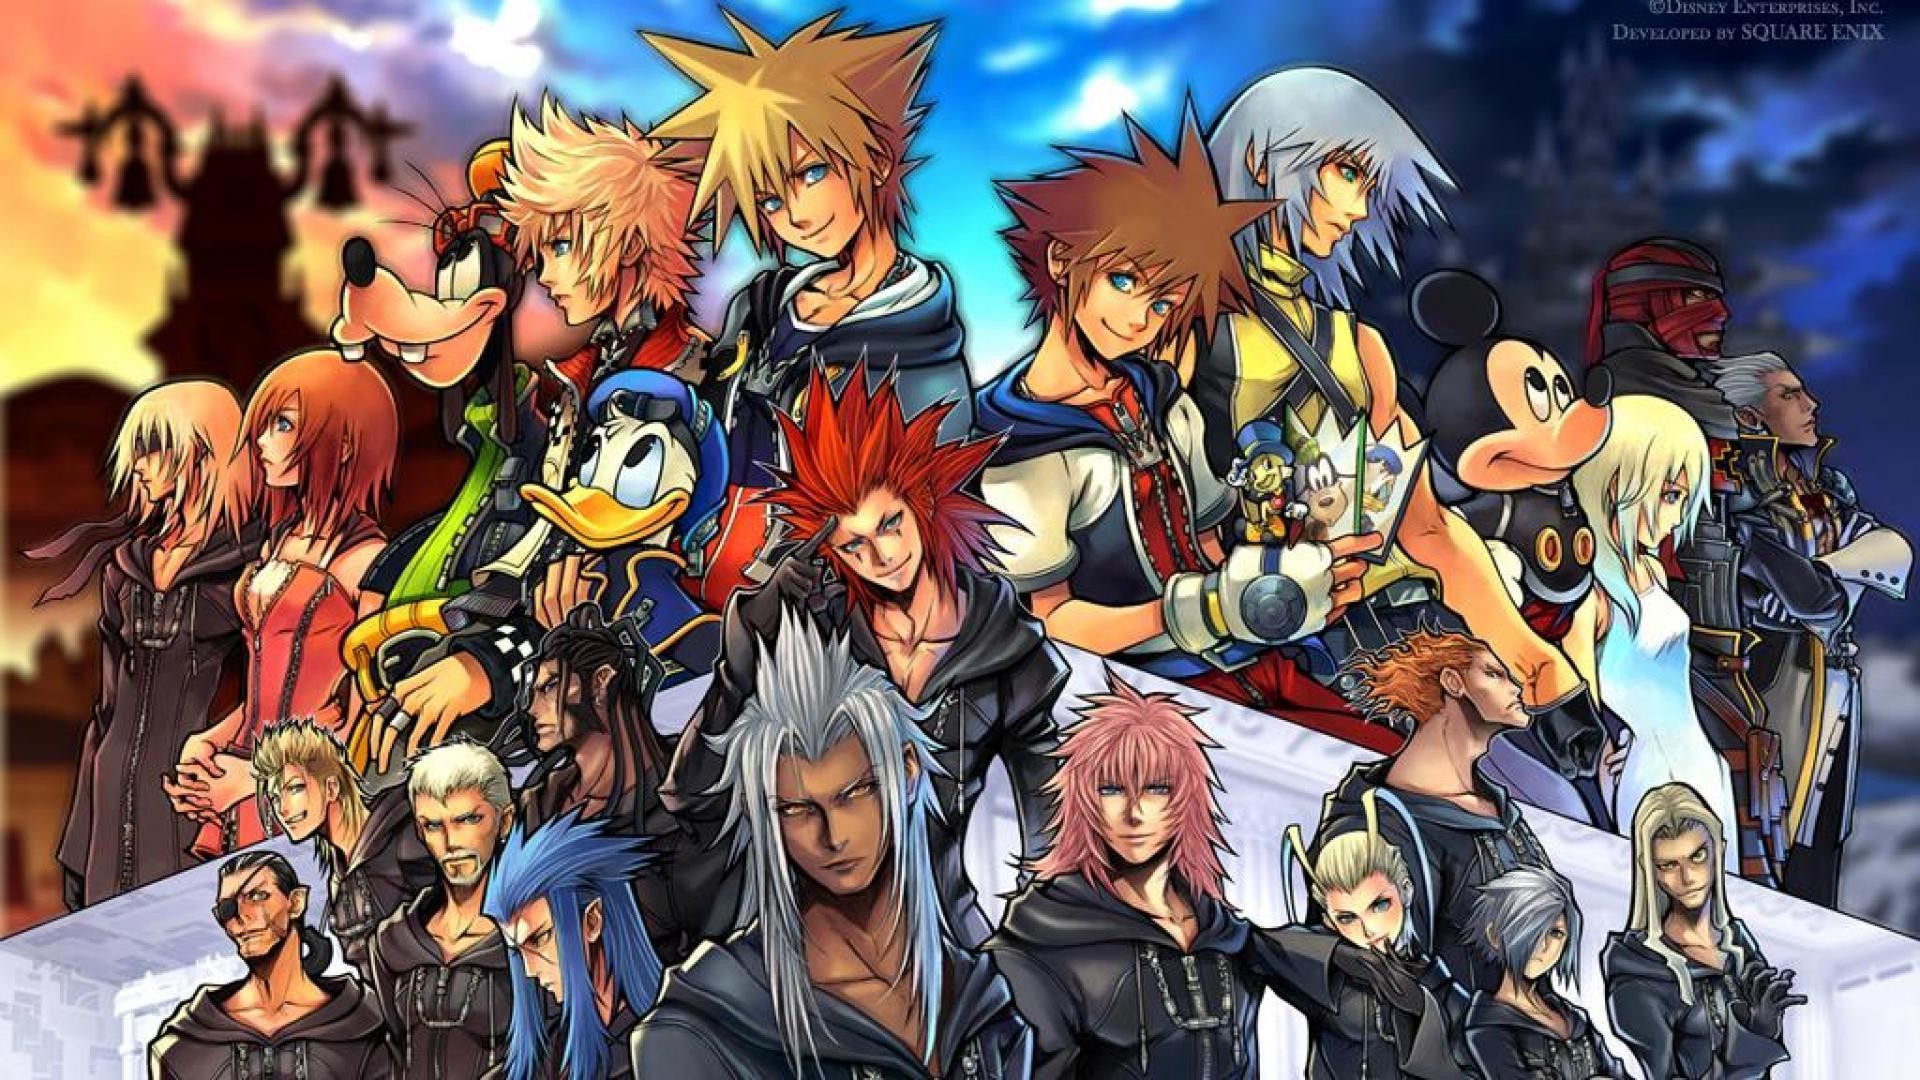 1920x1080 Wallpapers For > Kingdom Hearts 2 Wallpaper 